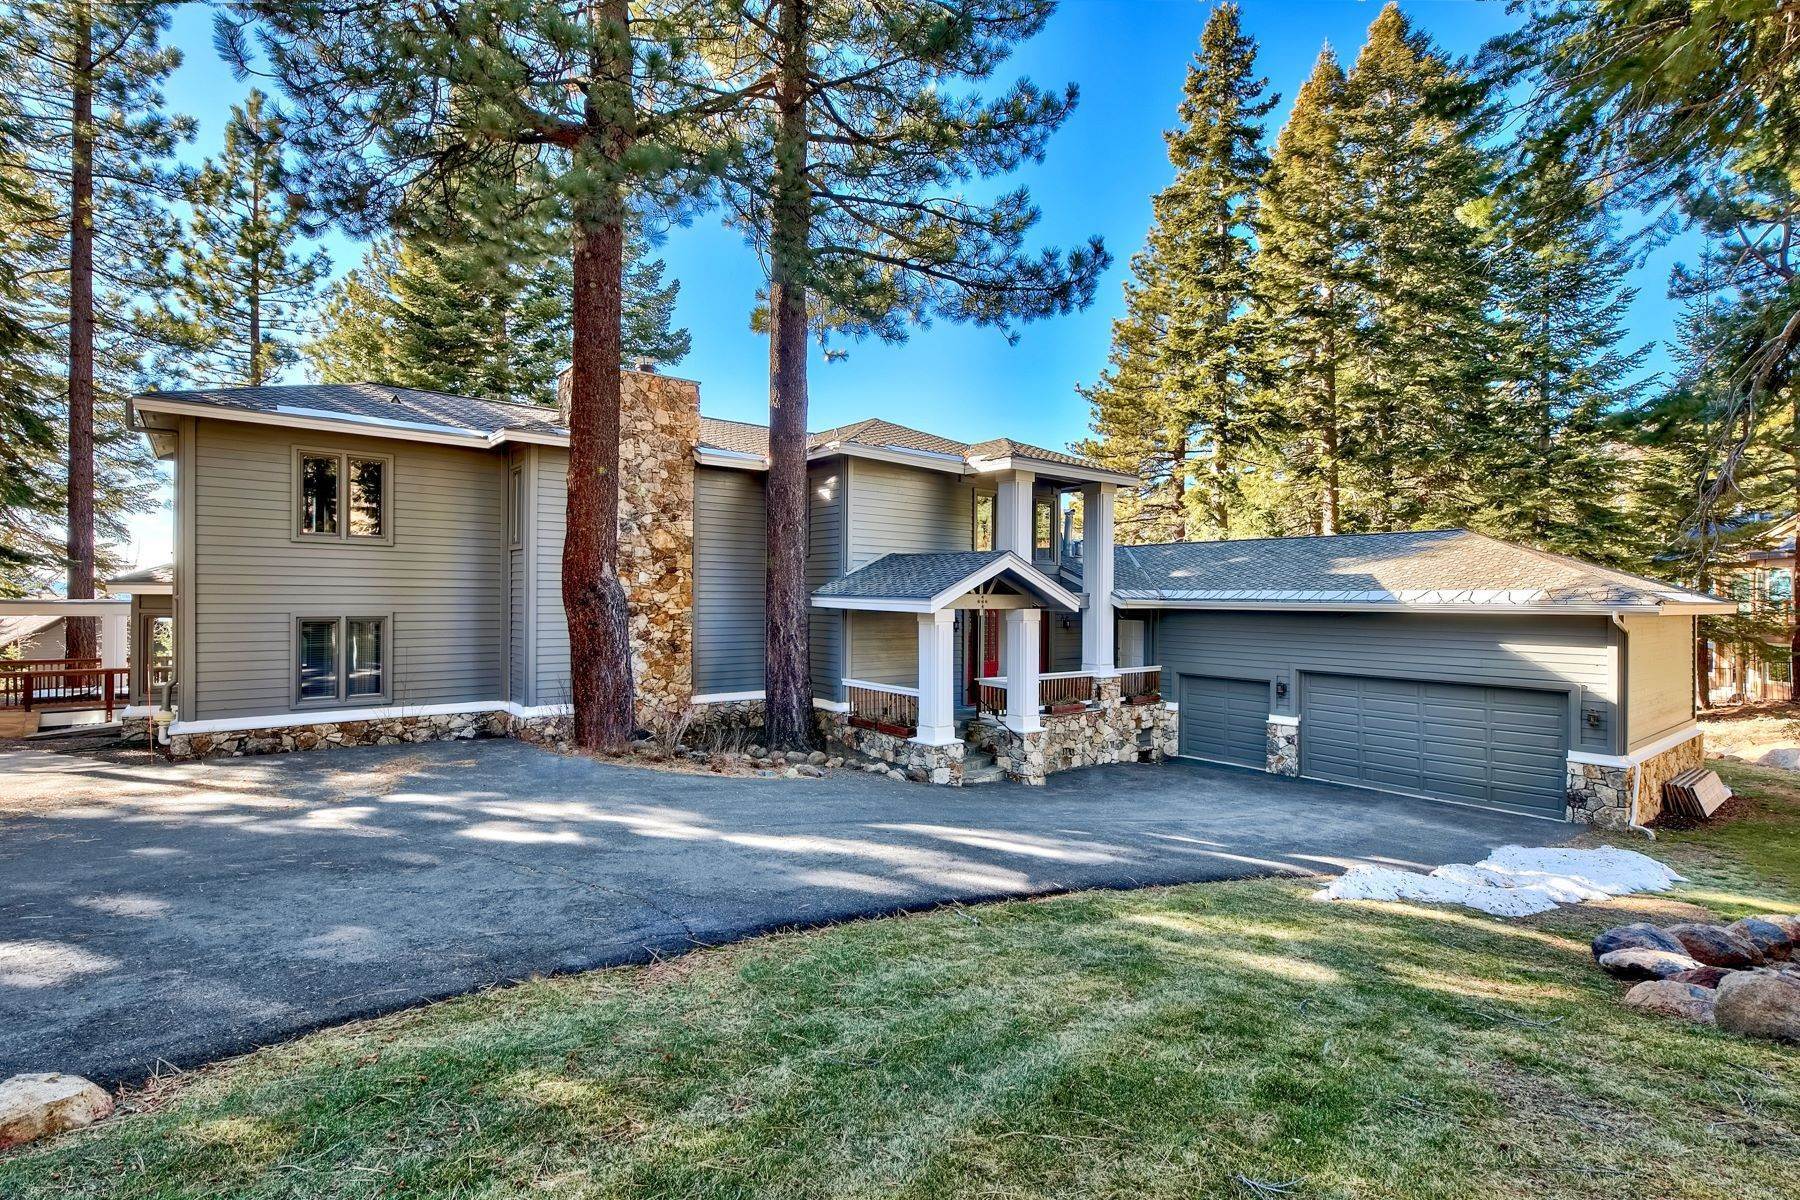 Property for Active at Stylish Home On Eastern Slope 959 Fairview Blvd Incline Village, Nevada 89451 United States